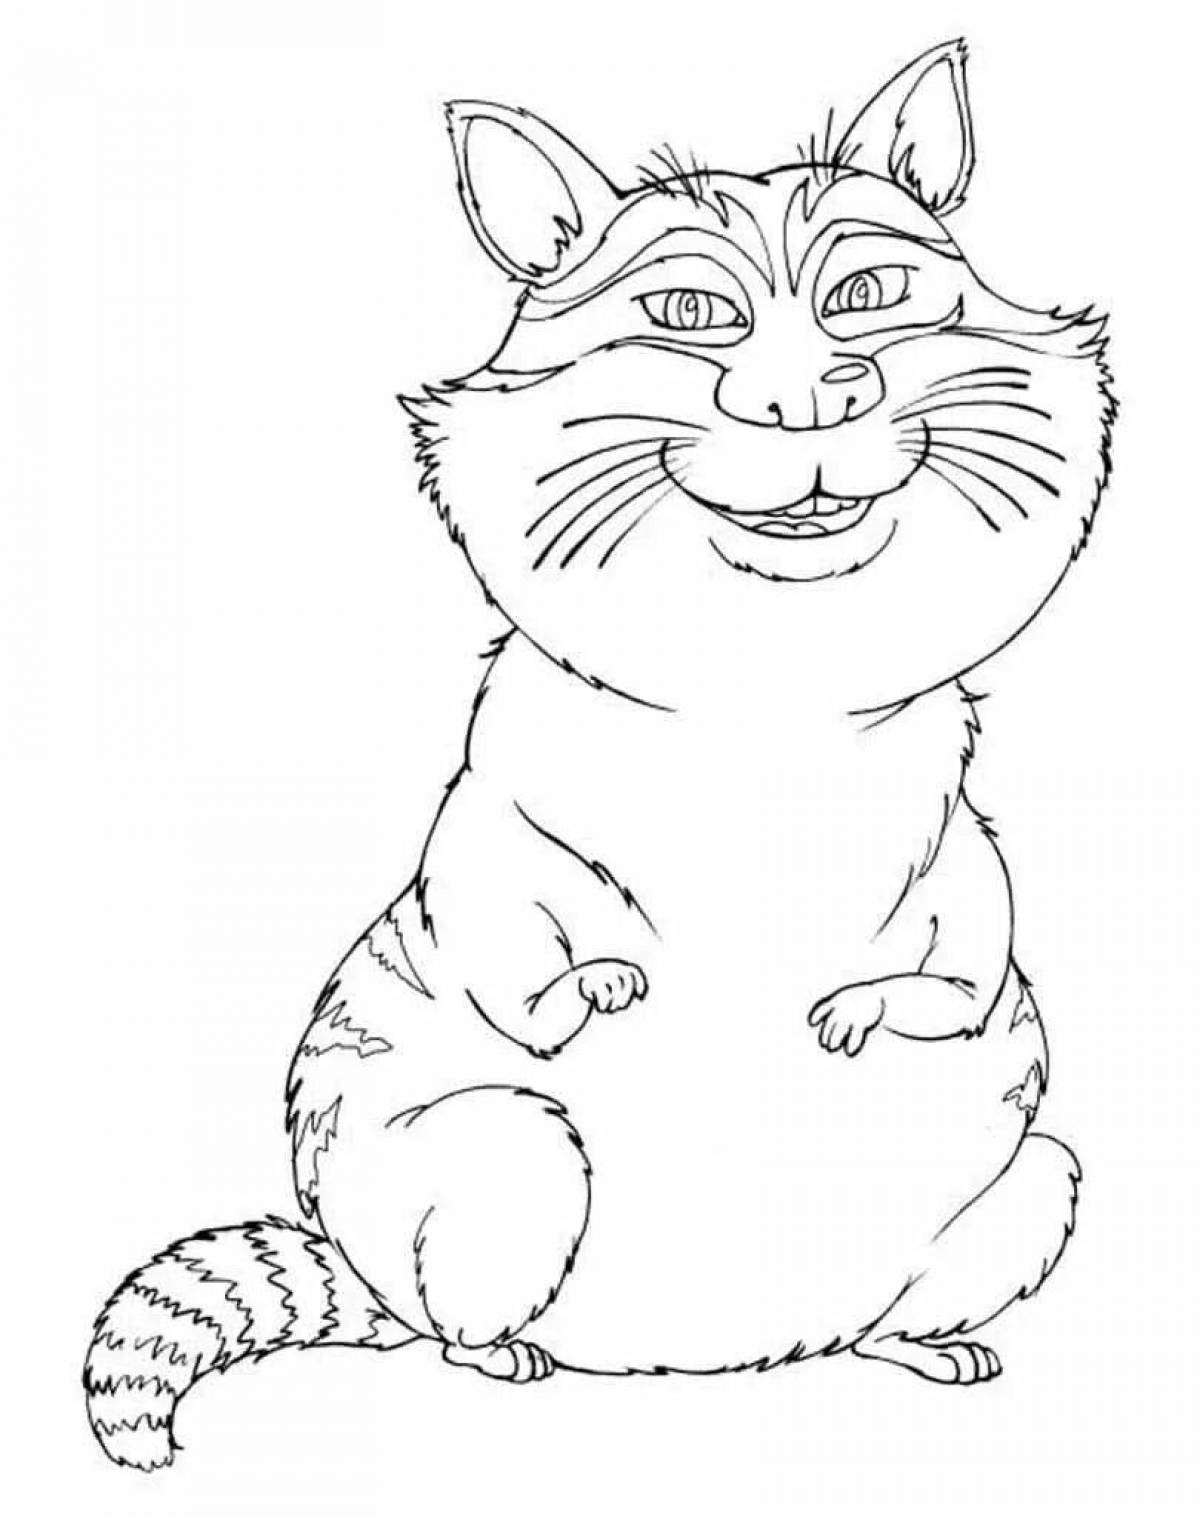 Coloring page sweet fat cat